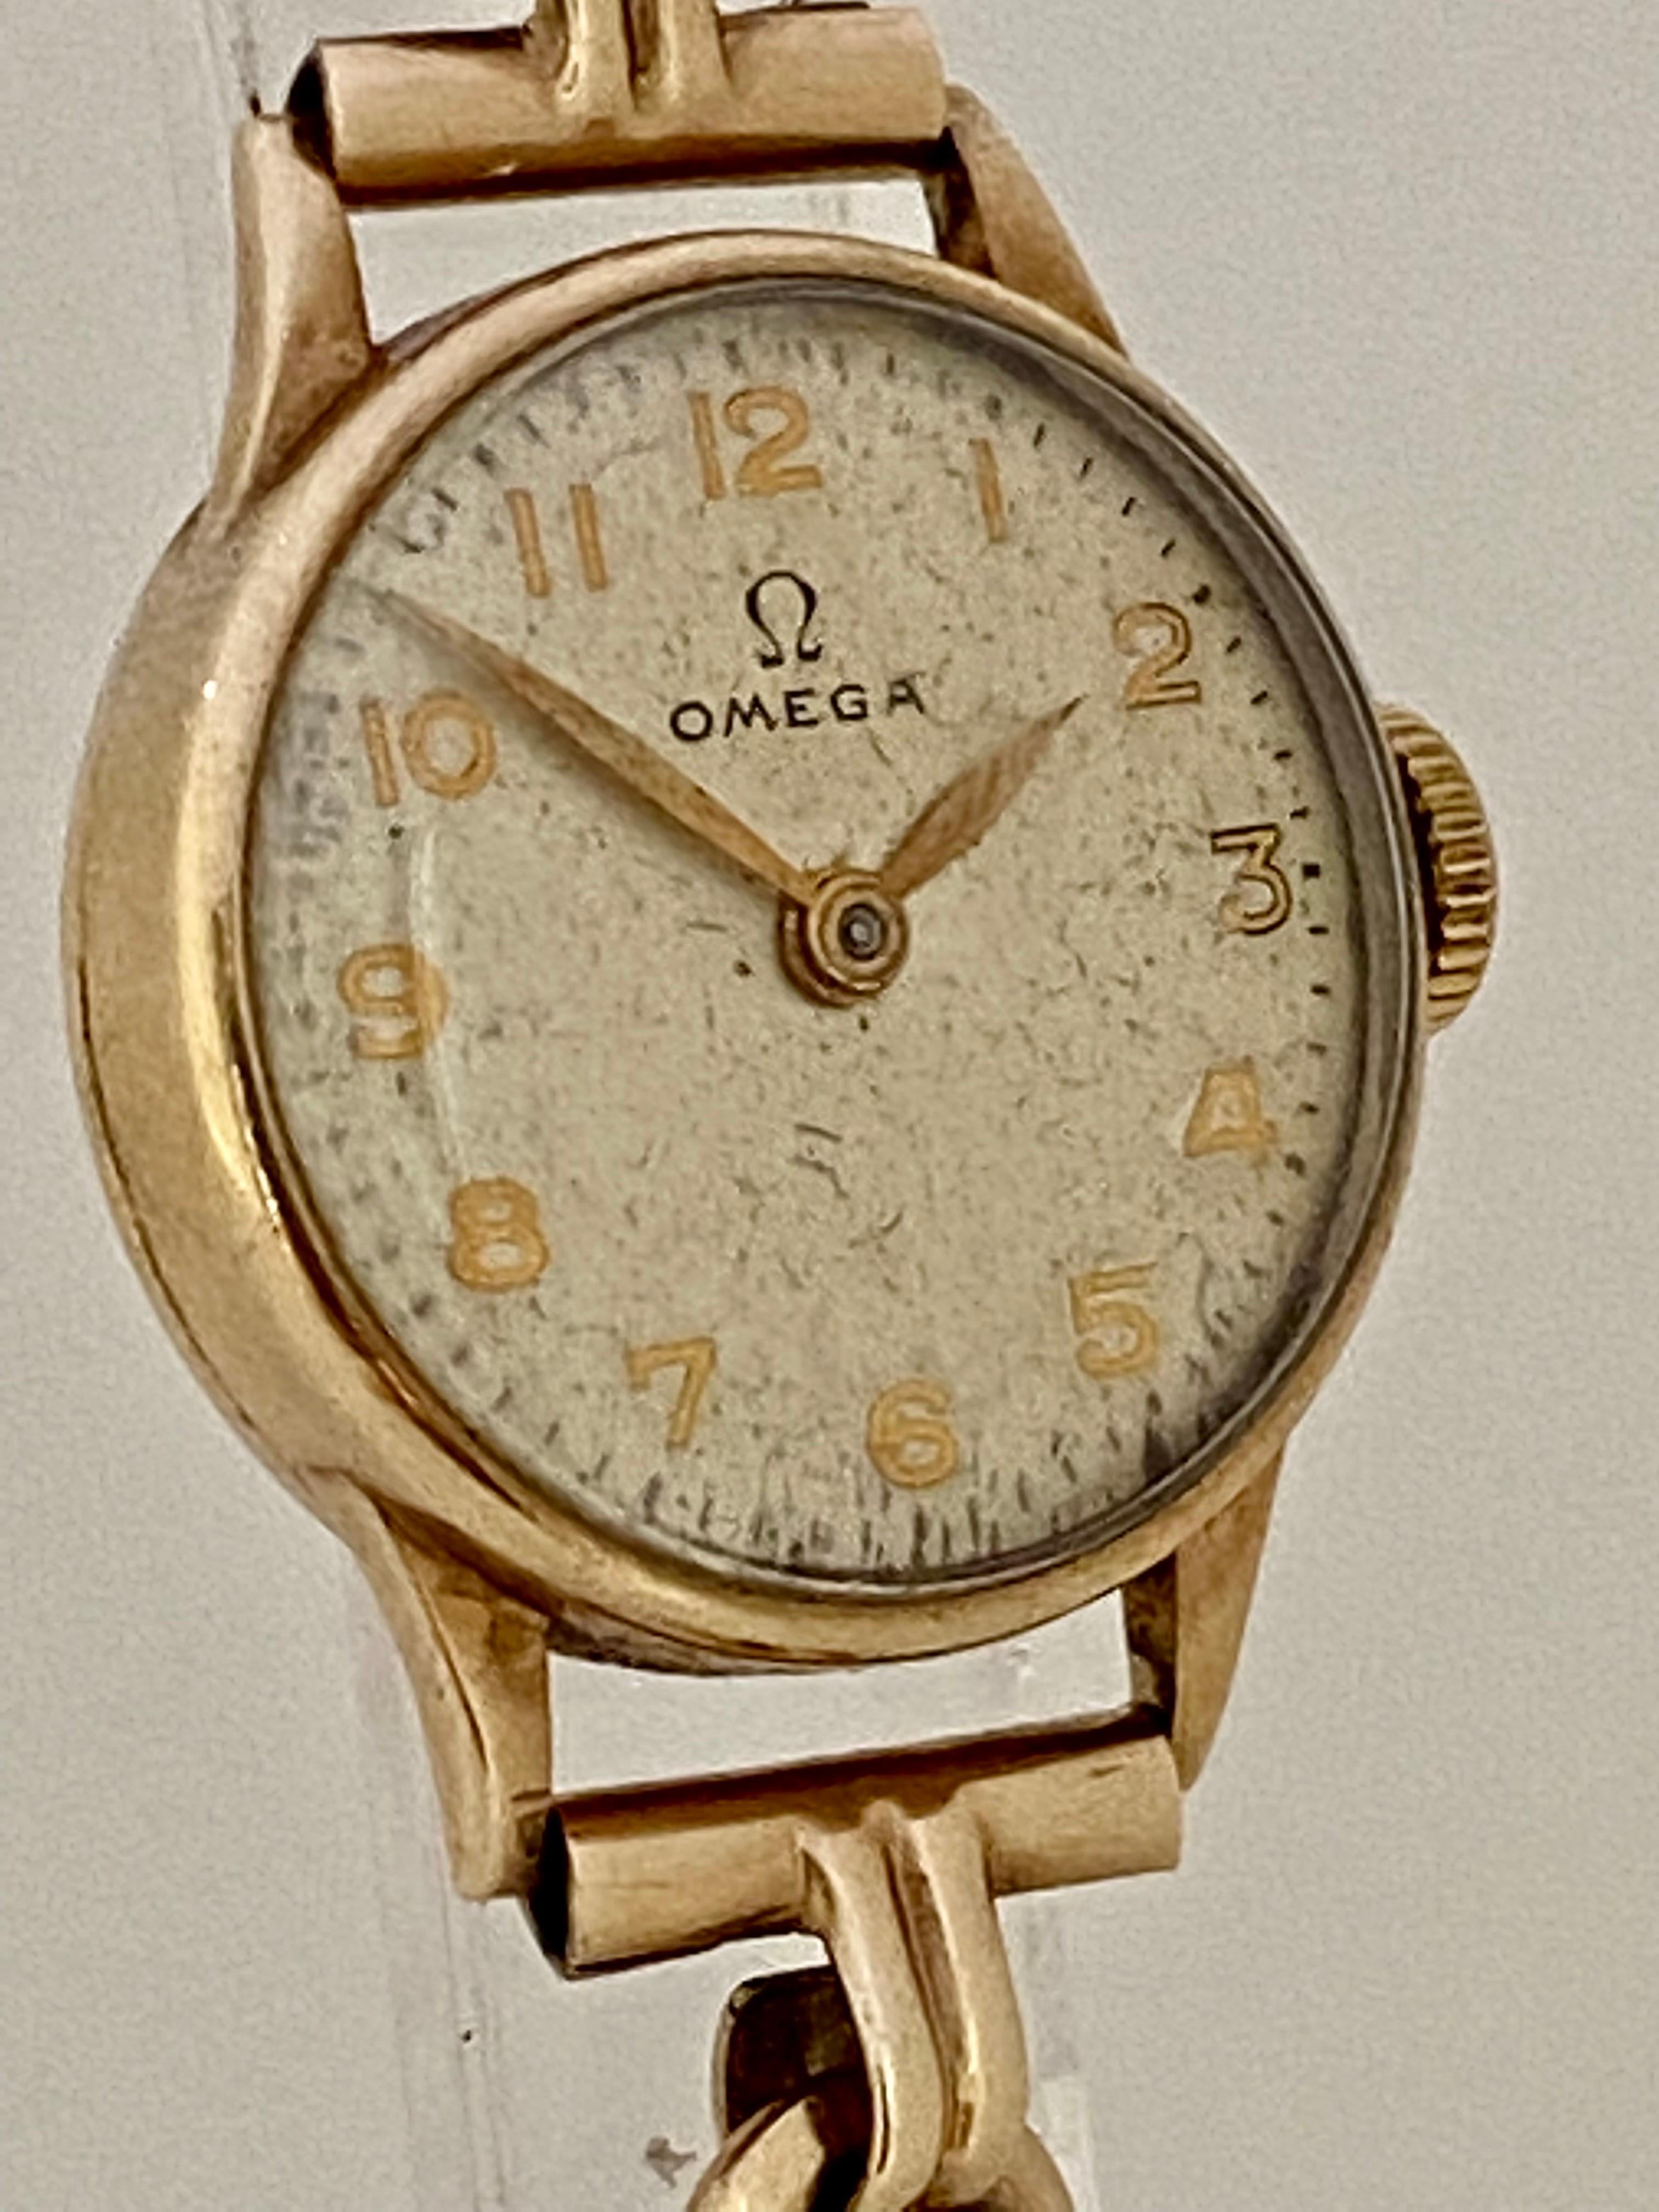 This beautiful pre-owned 20mm diameter gold hand winding watch is in good working condition and is running well (It keeps a good time). Visible signs of ageing and wear with light marks on the the watch case surface. The beige dial has aged as